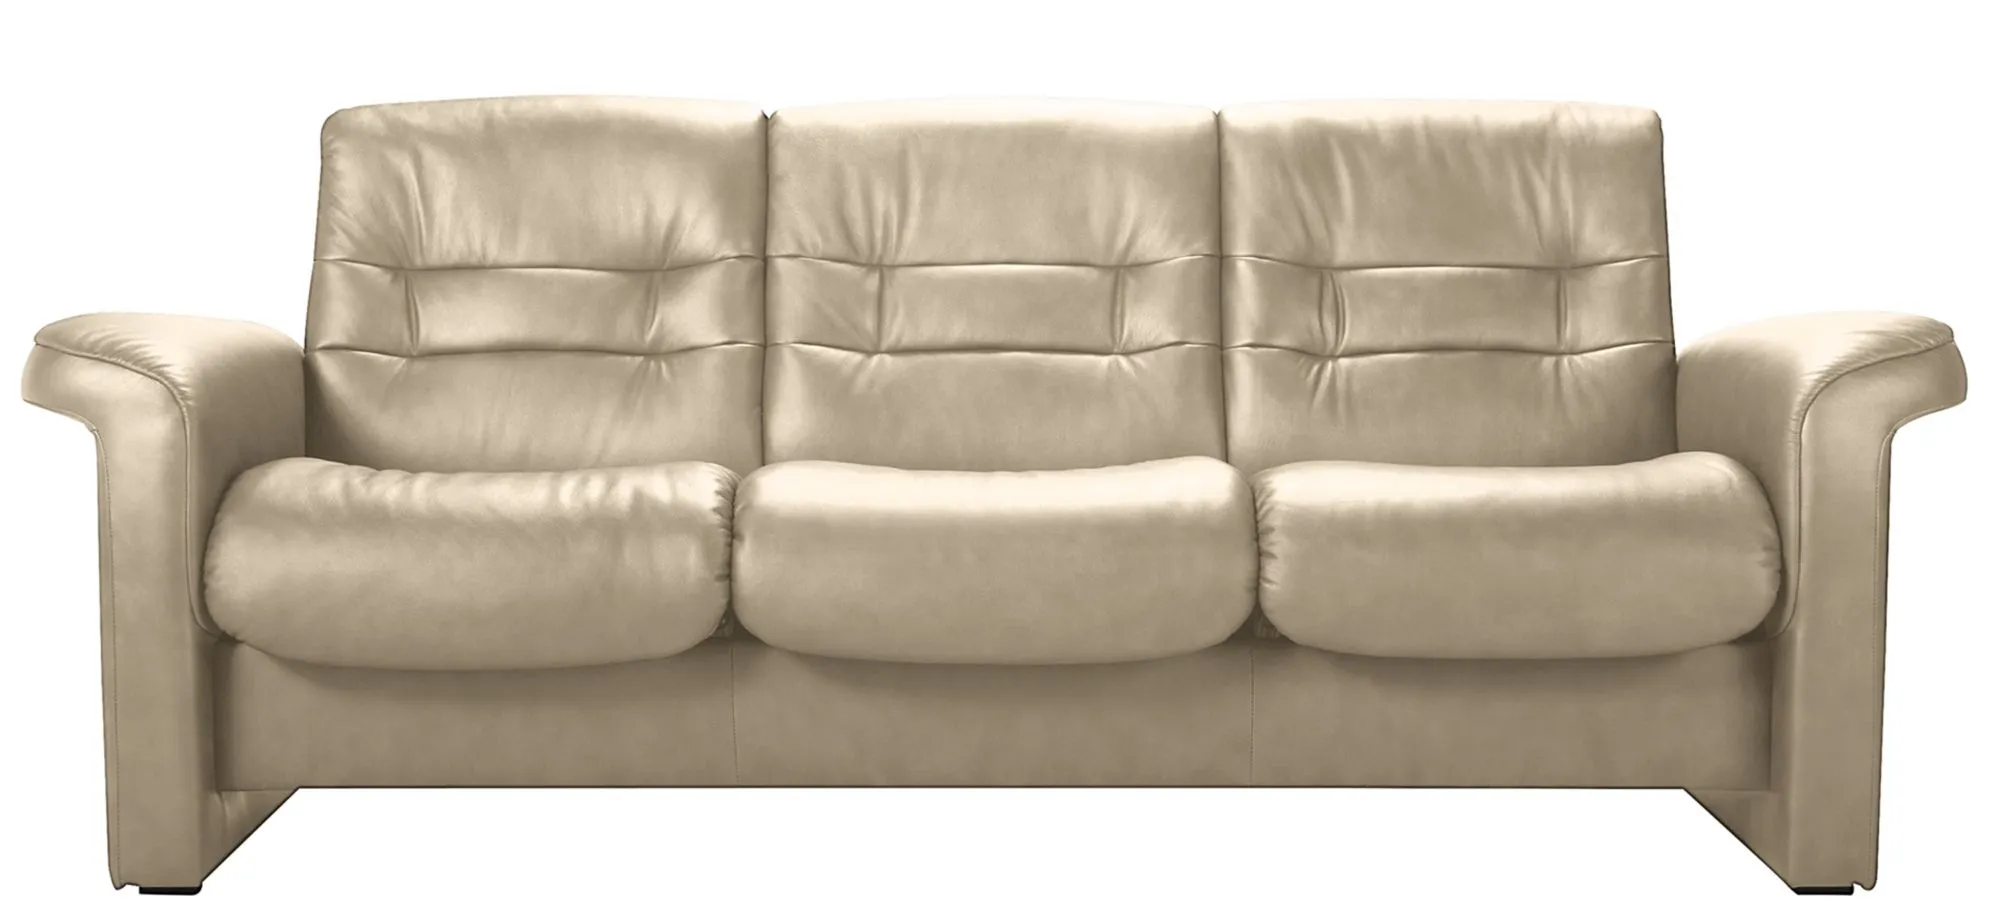 Stressless Sapphire Leather Reclining Low-Back Sofa in Paloma Light Grey by Stressless